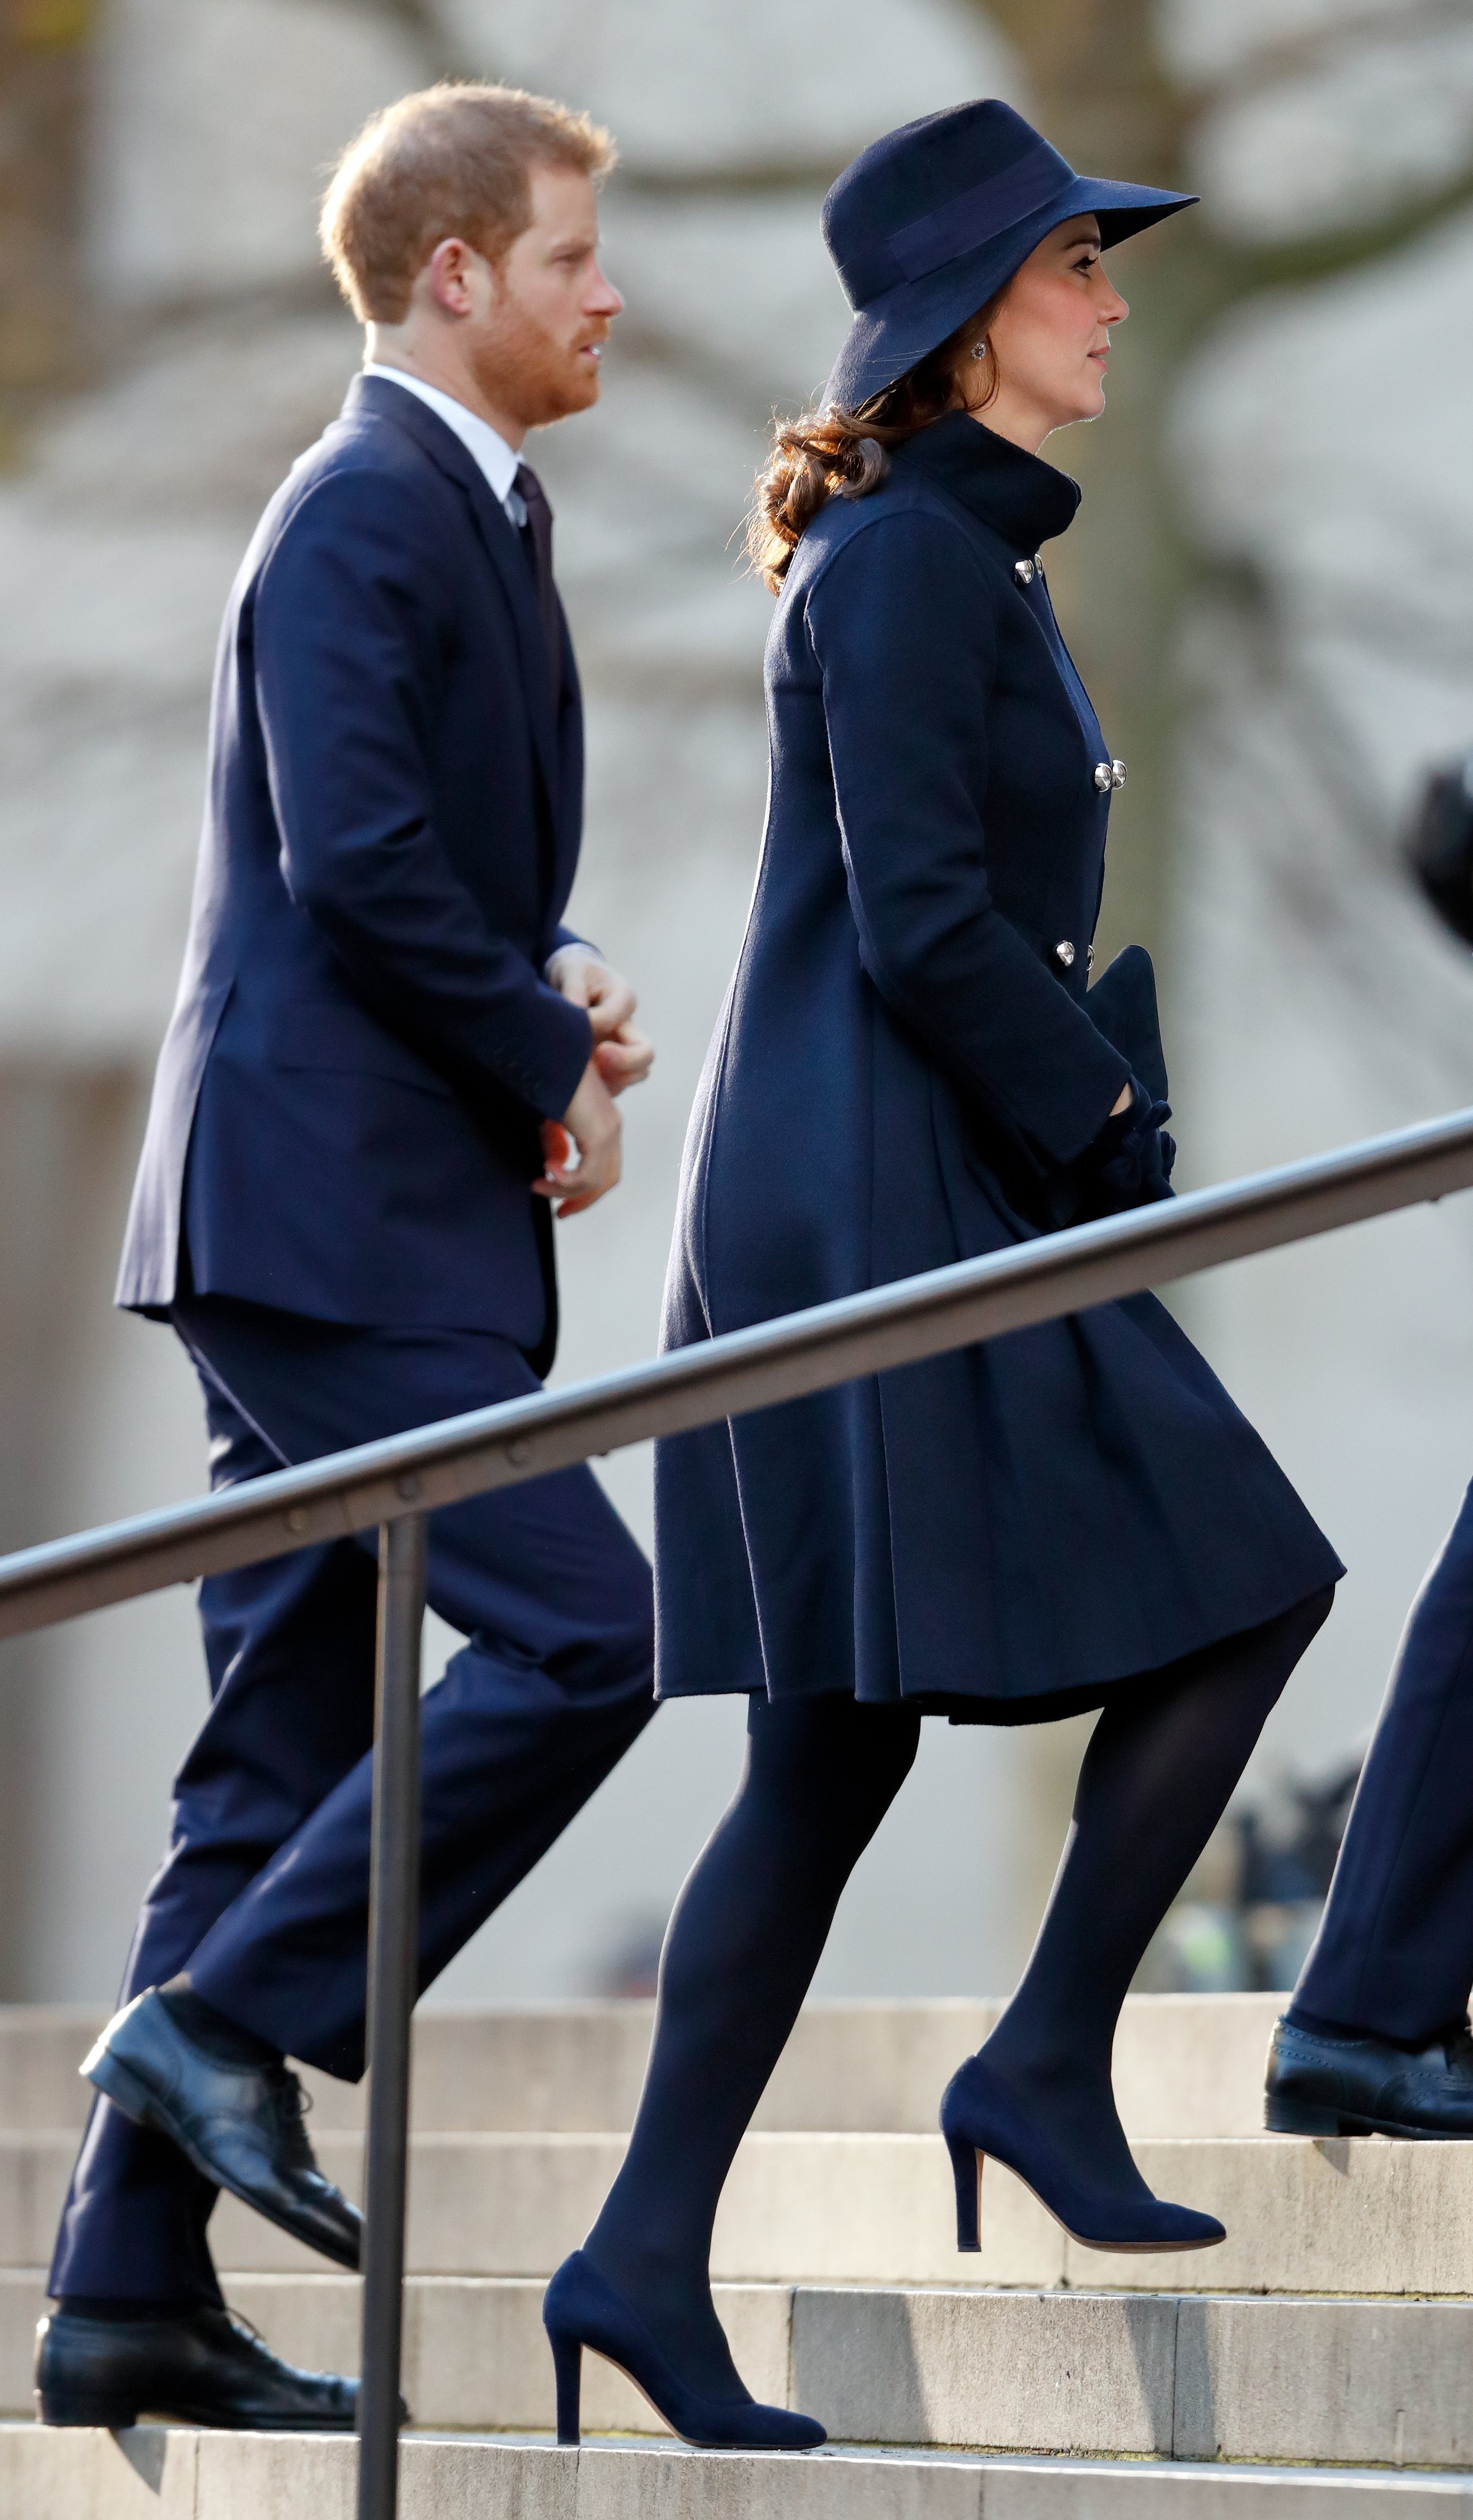 Prince Harry and Kate Middleton attending the Grenfell Tower national memorial service at St Paul's Cathedral on December 14, 2017 in London, England. / Source: Getty Images